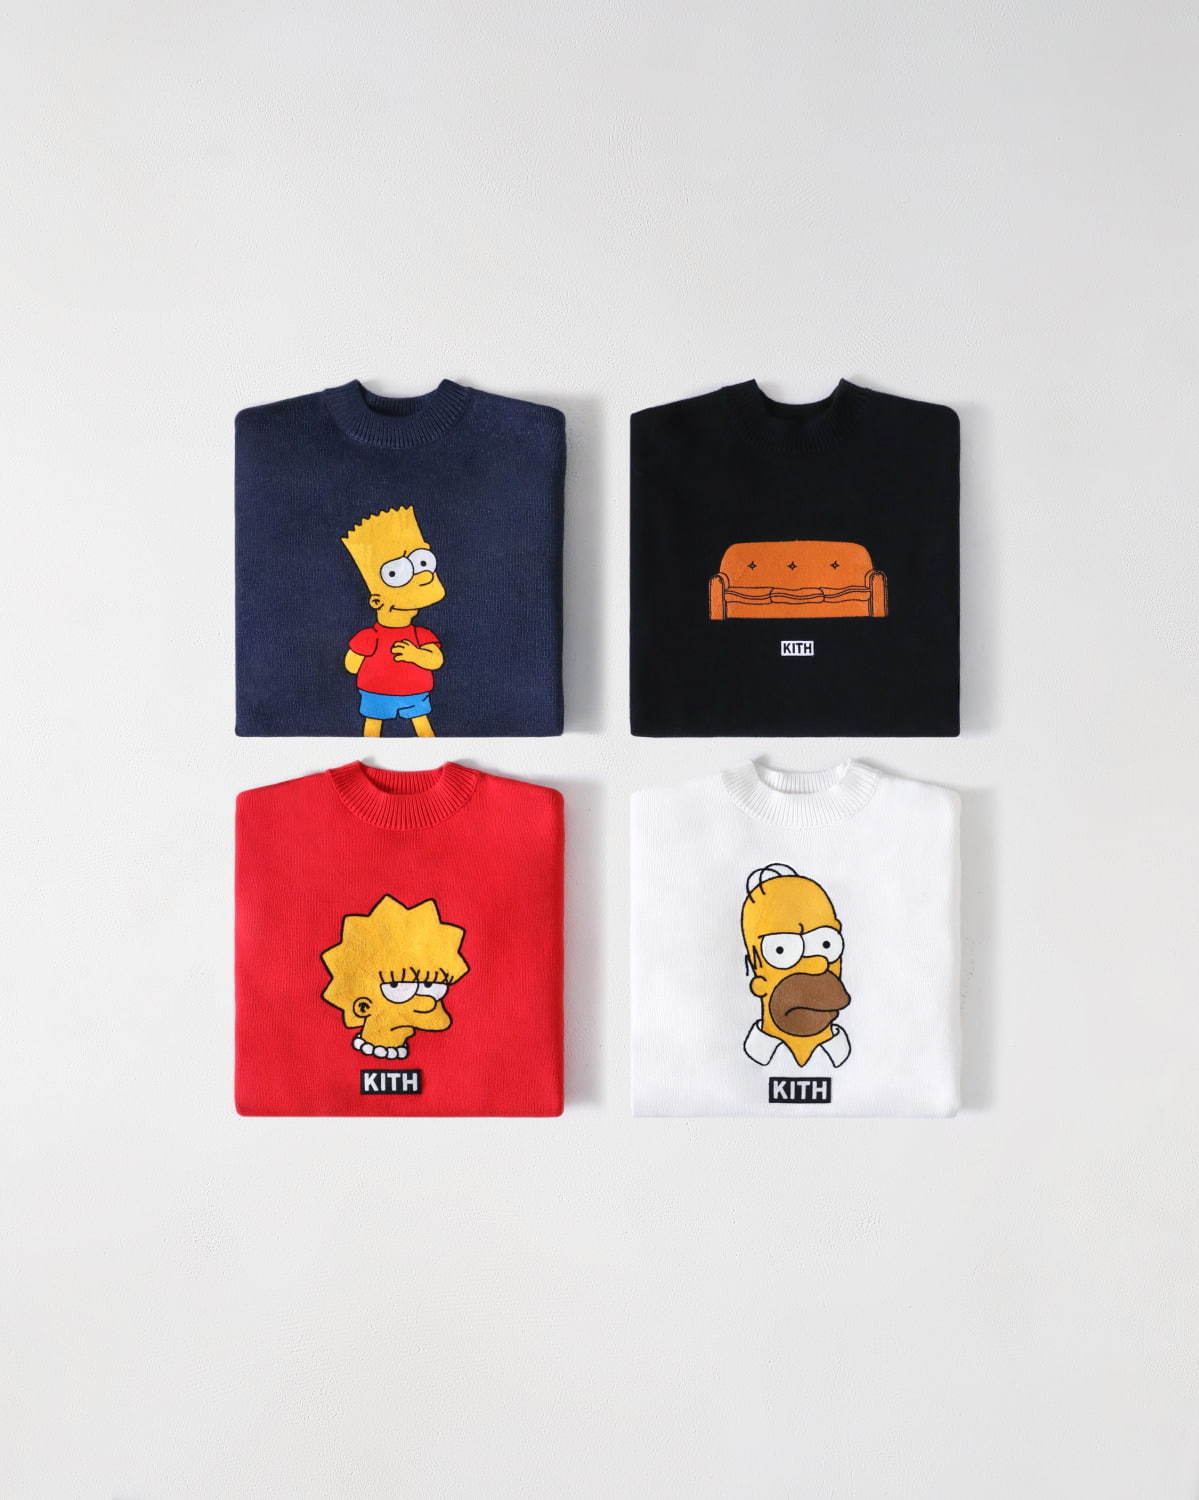 KITH for The Simpsons